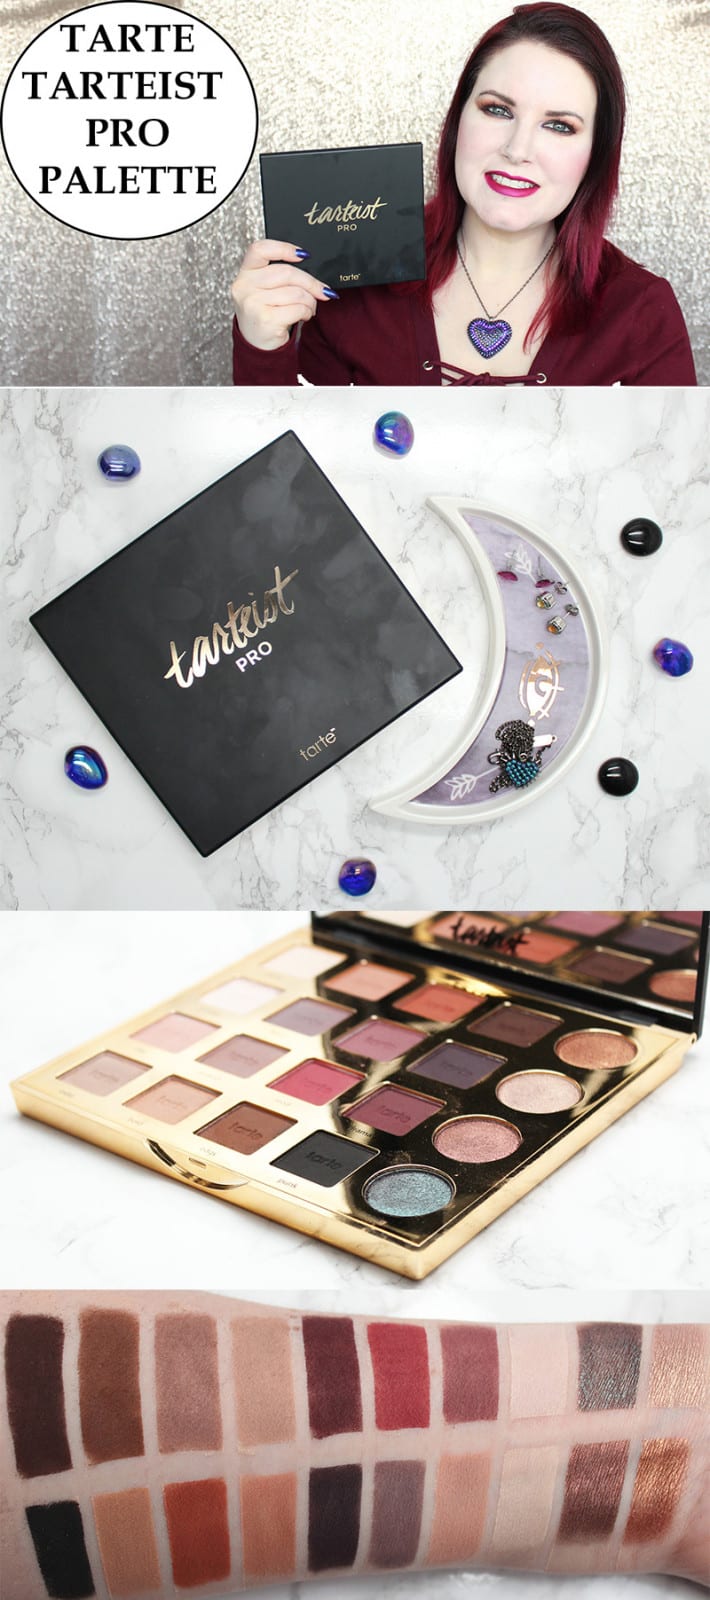 Tarte Tarteist Pro Palette Review Swatches Video Looks